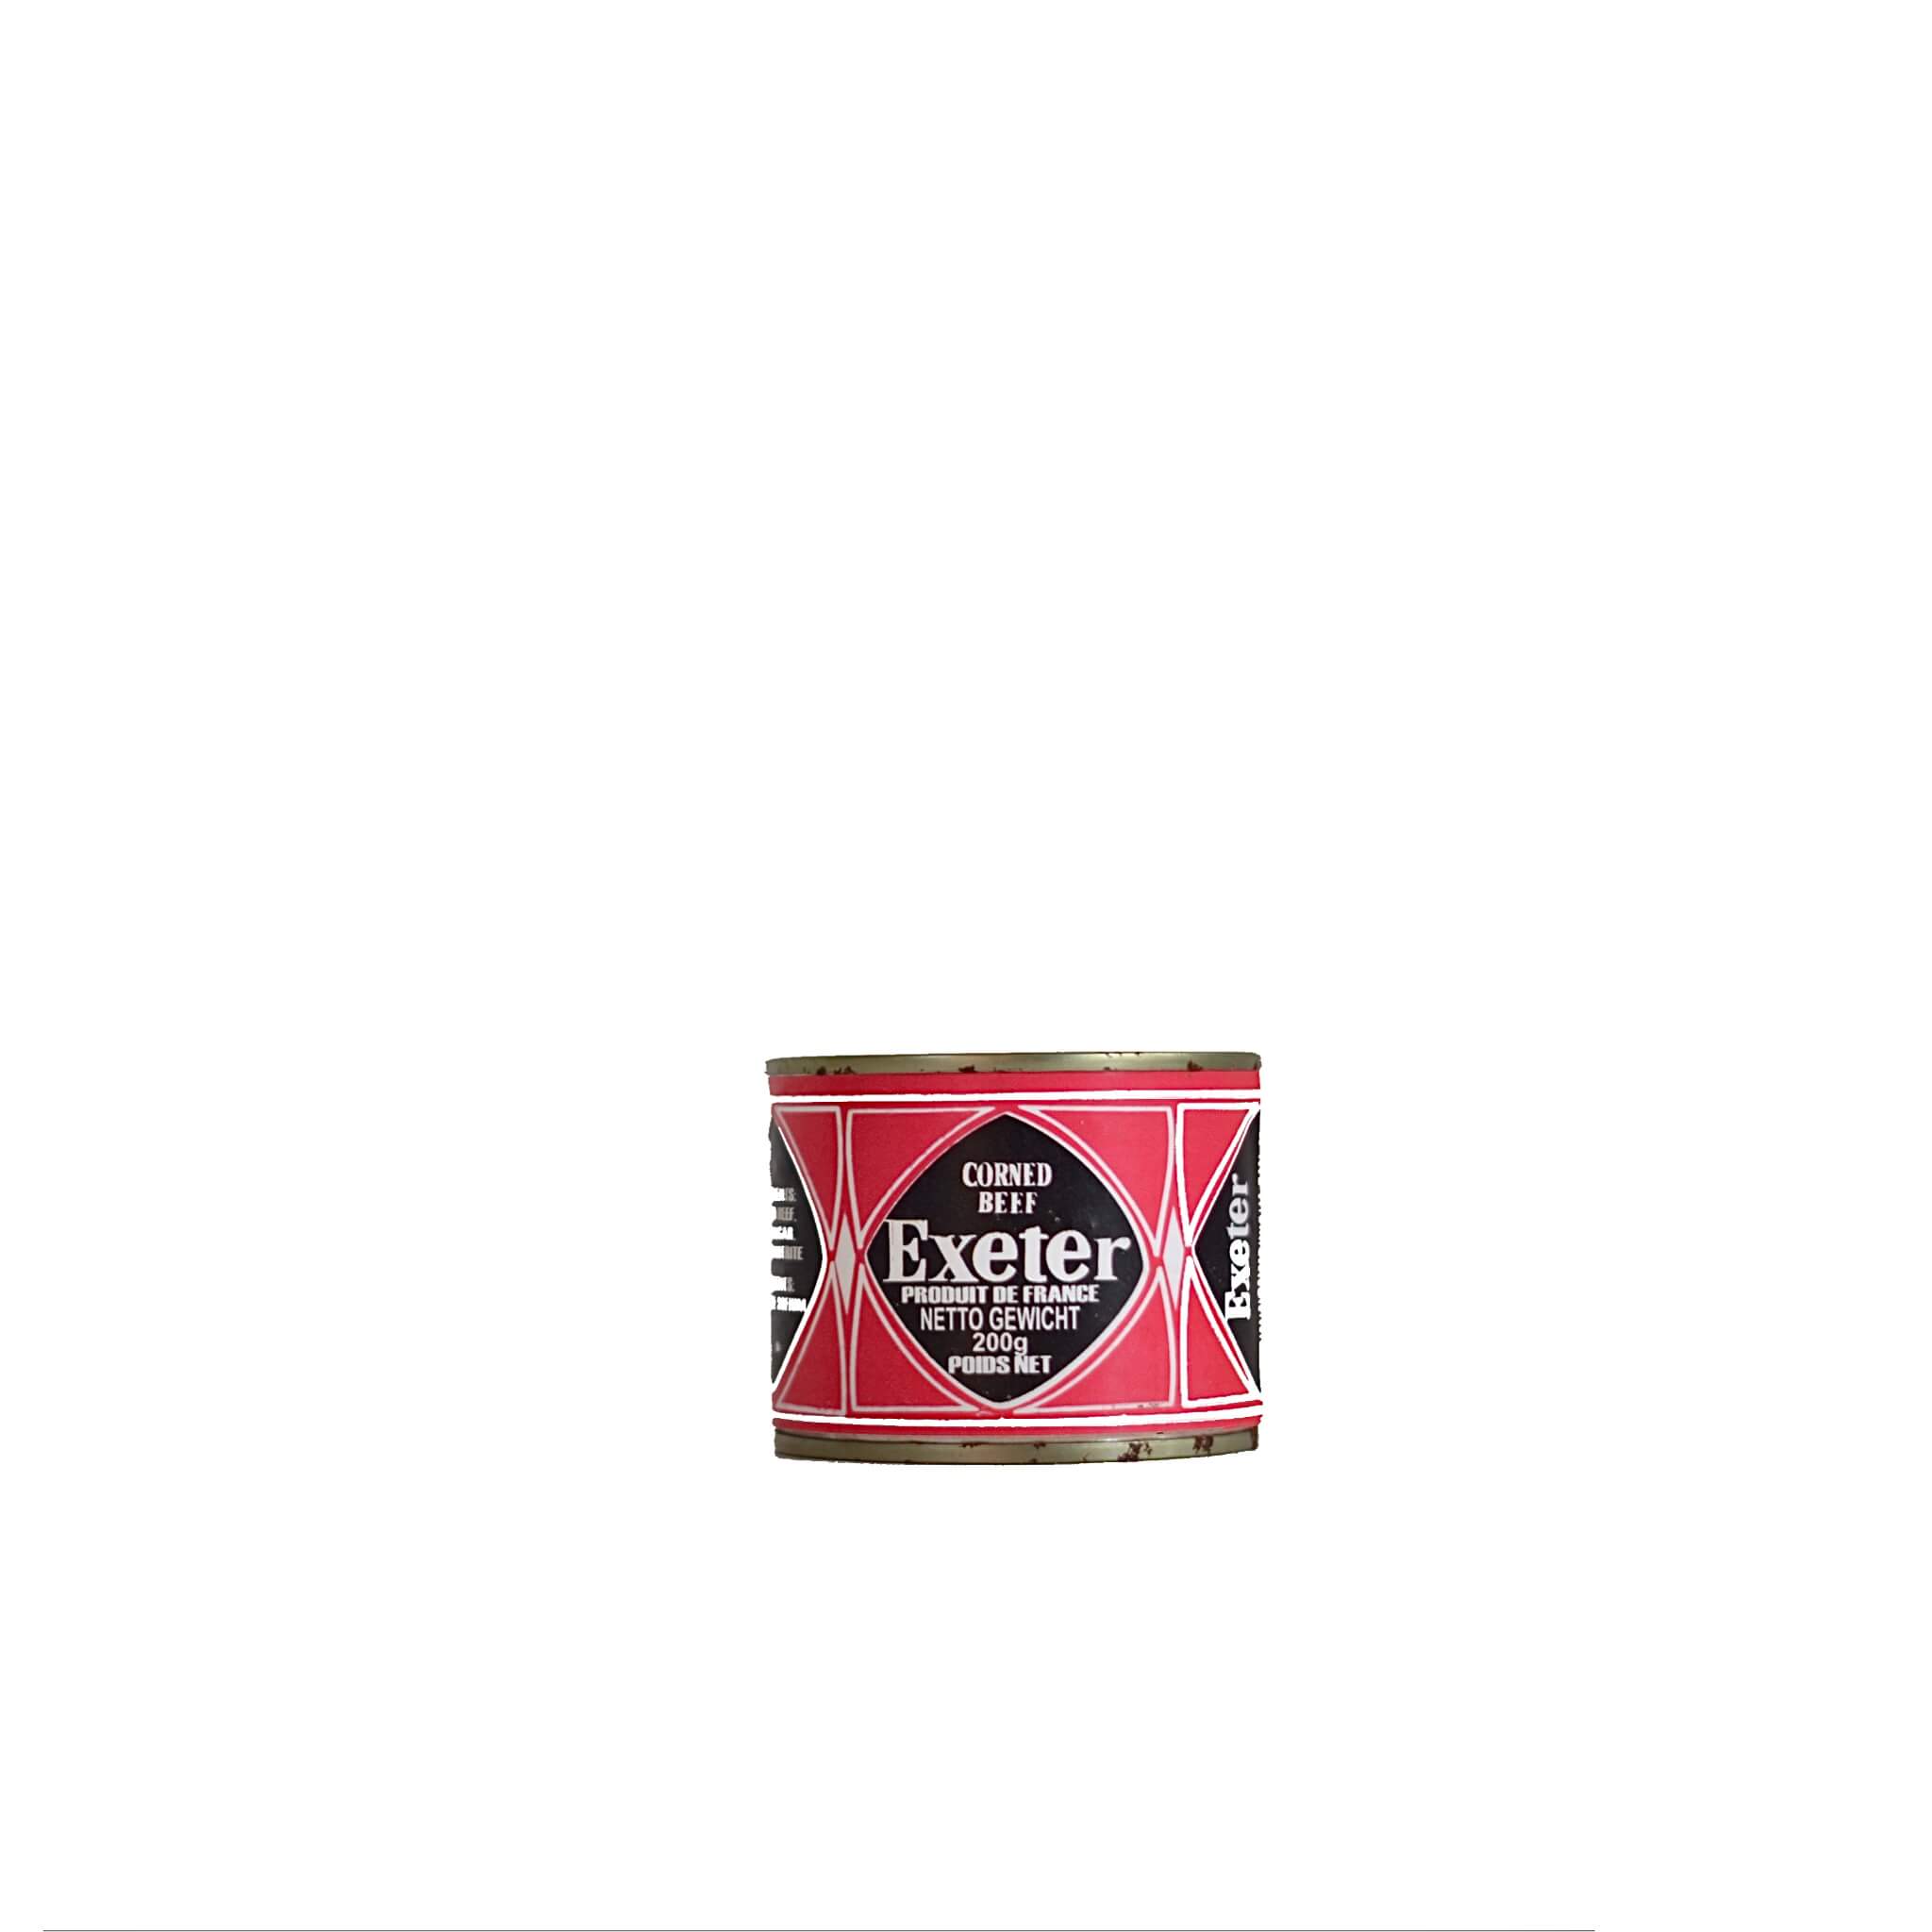 a can of Exeter corned beef